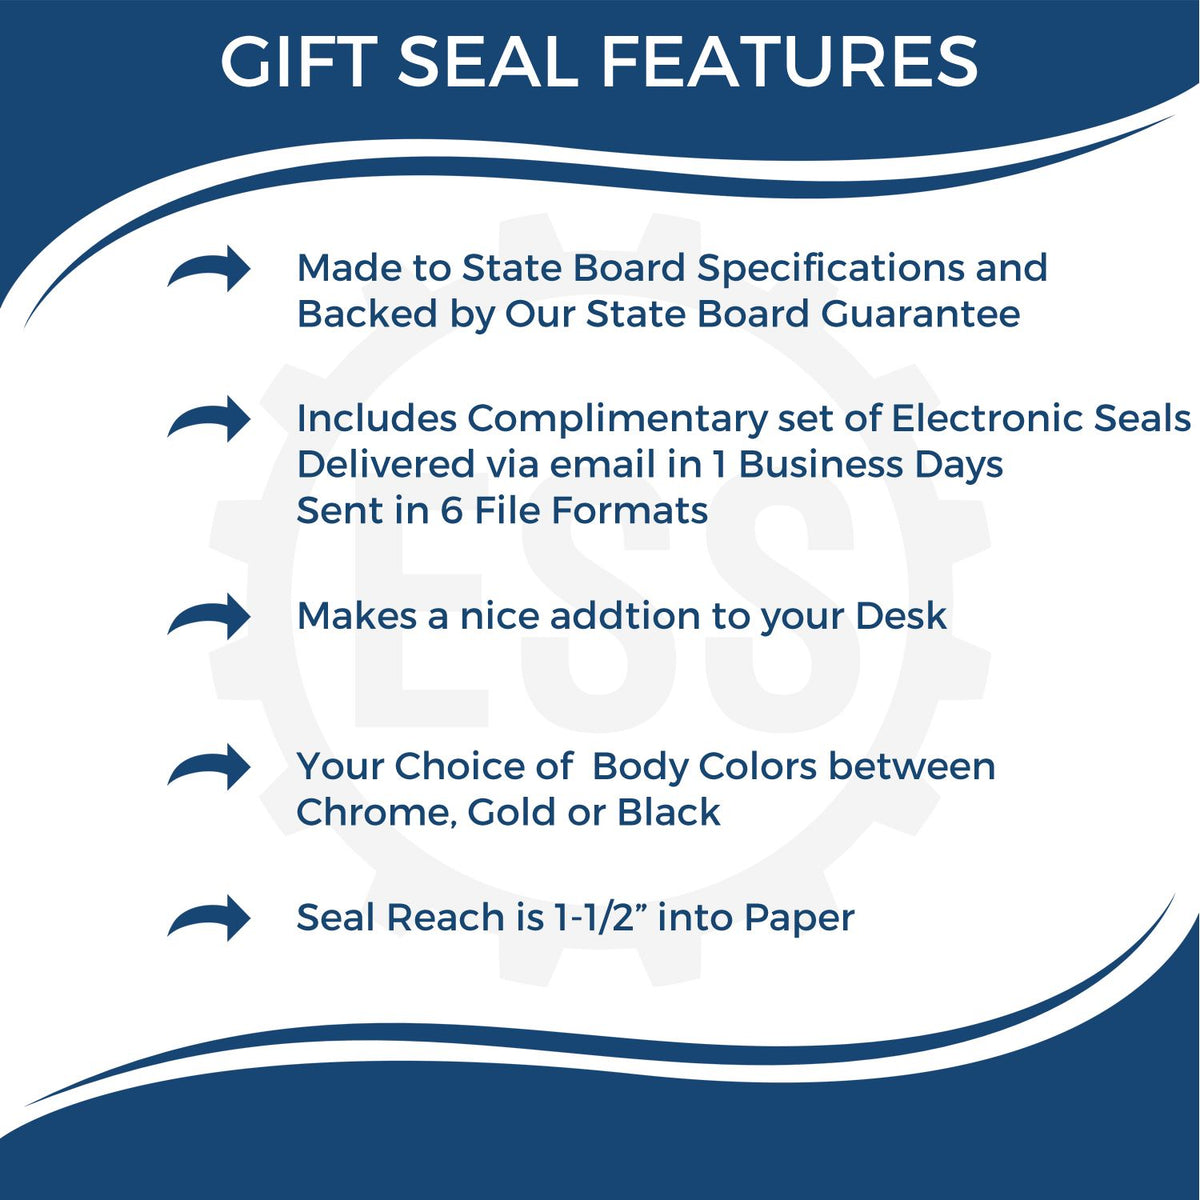 A picture of an infographic highlighting the selling points for the Gift Alabama Engineer Seal